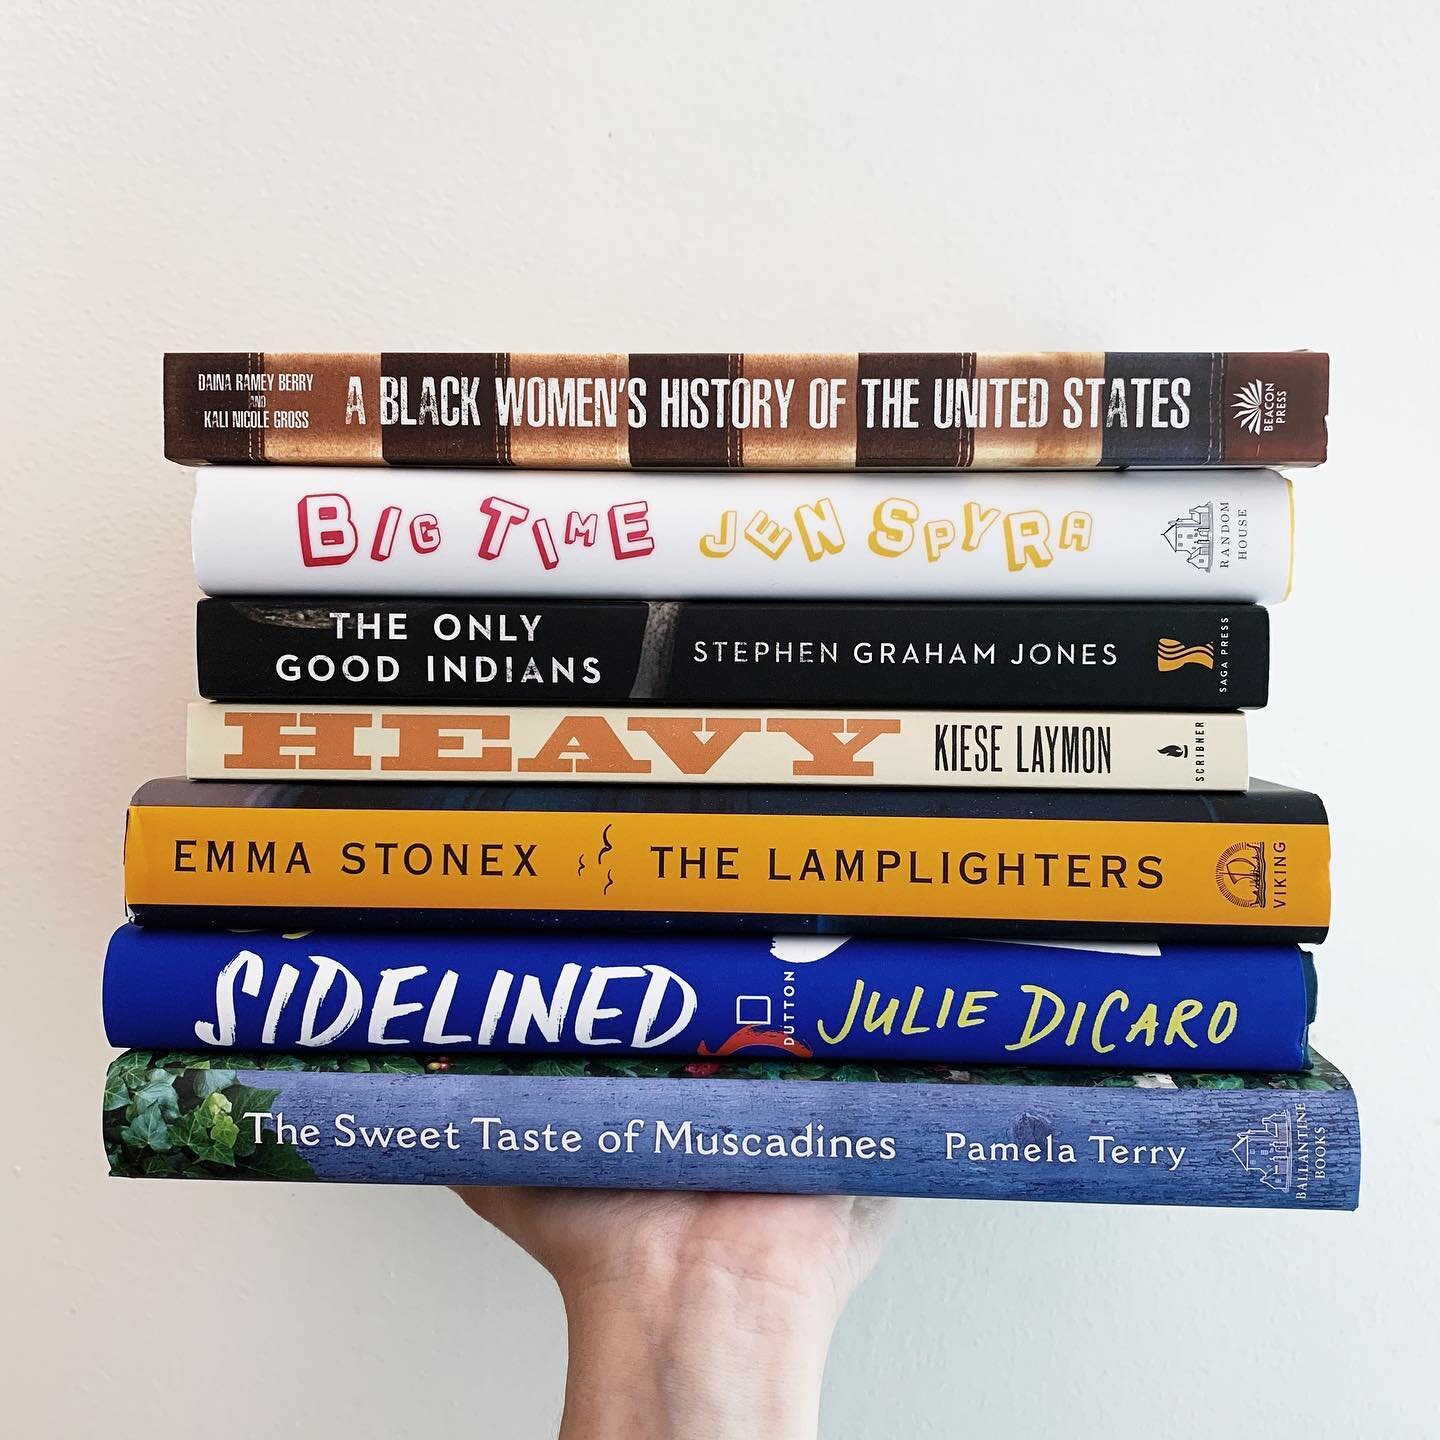 You know what day it is! Which new releases are you excited about this week?
&bull;
&bull;
&bull;
#TheBookshelf #BookshelfTville #Bookstagram #Books #Reading #Bookstore #ShopSmall #LifeAtTheShelf #NewReleaseTuesday #NewBooks #New #ReleaseDay #NewBook